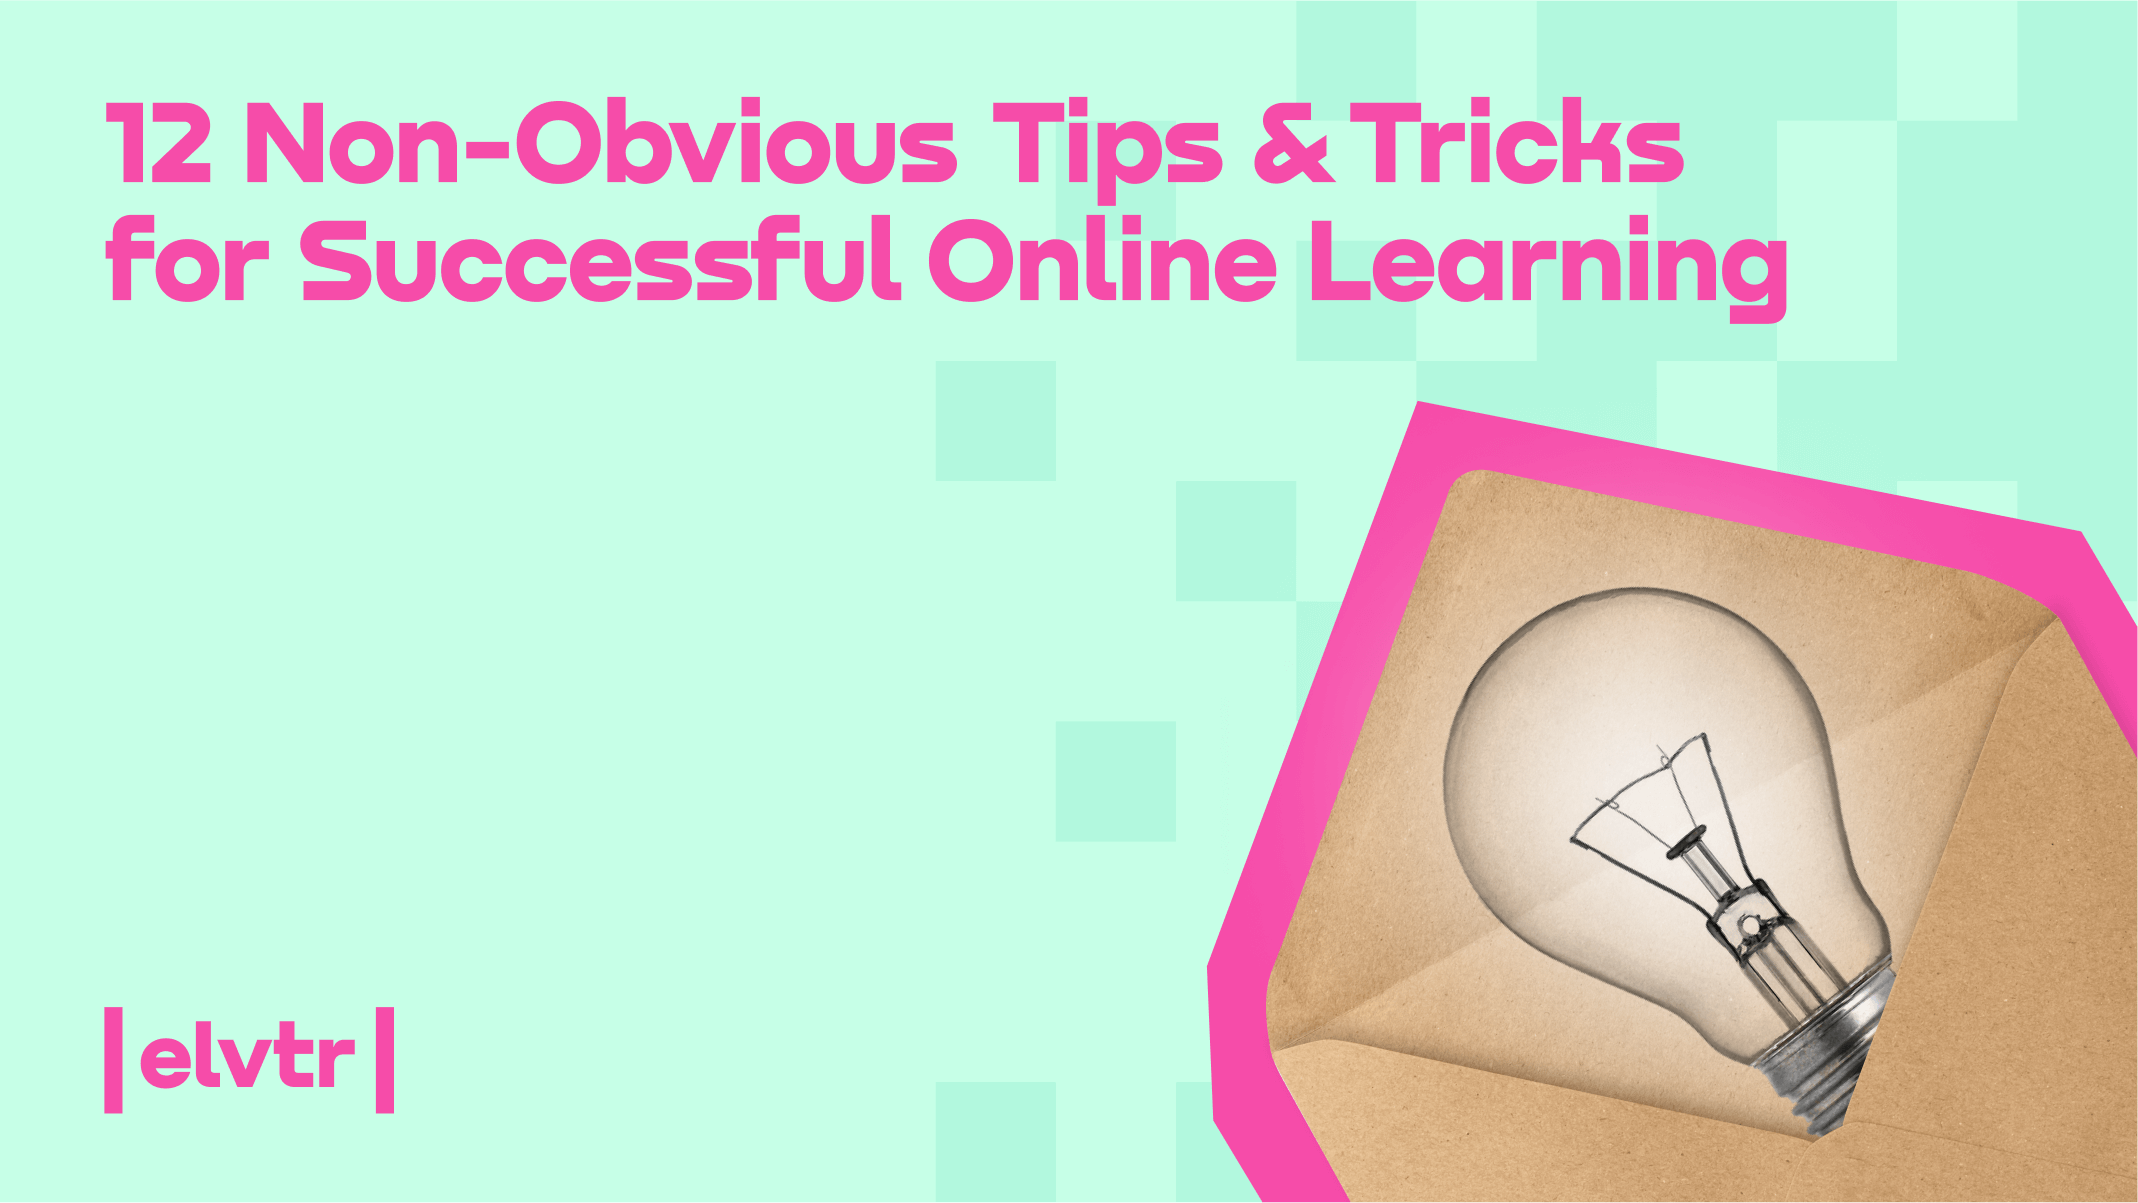 12 Non-Obvious Tips & Tricks for Successful Online Learning image